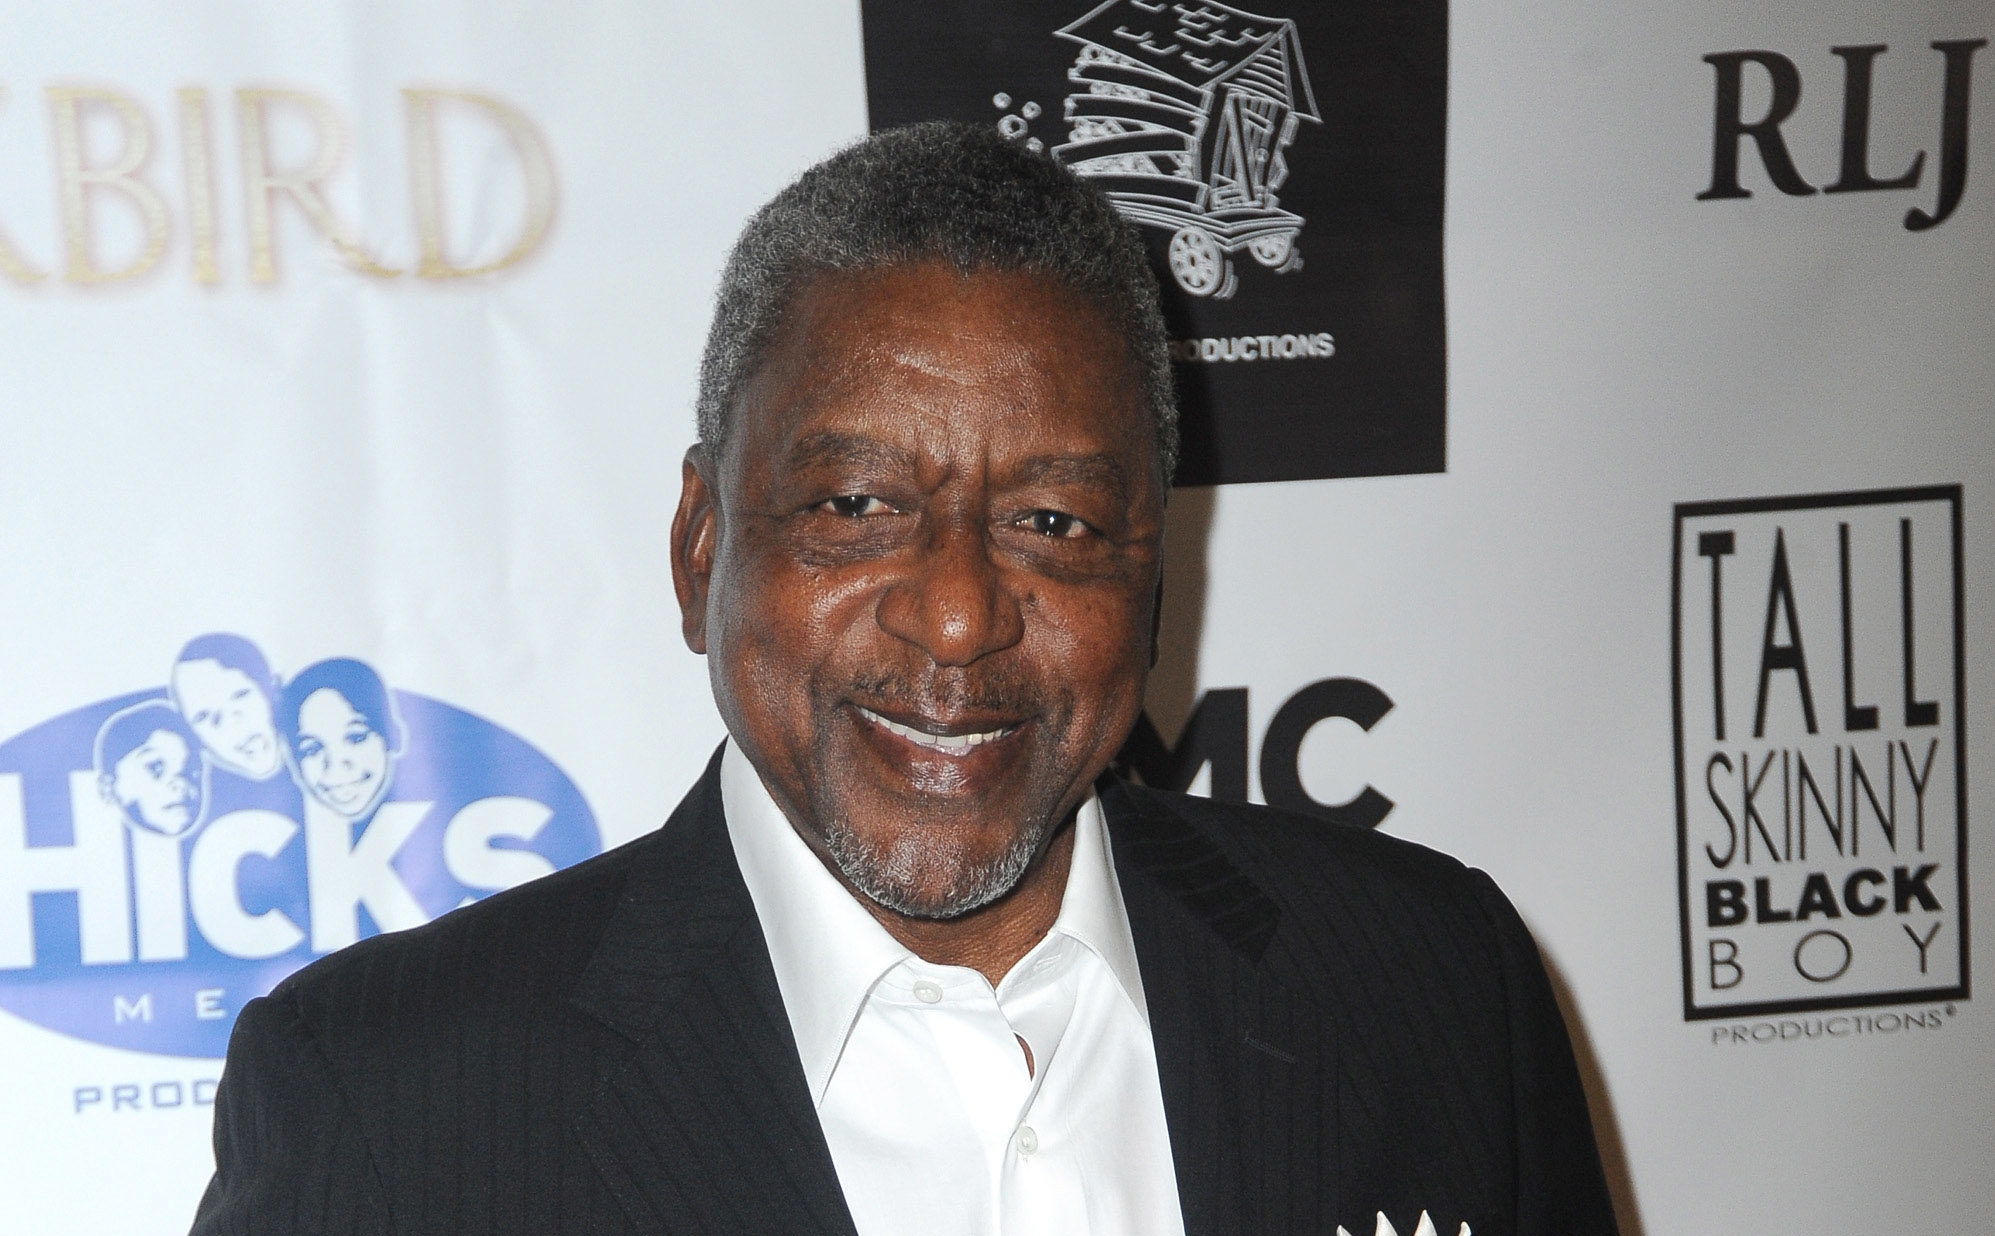 Bet Founder Bob Johnson Says Democrats Have Moved Too Far To The Left Praises Trump Tax Cuts 